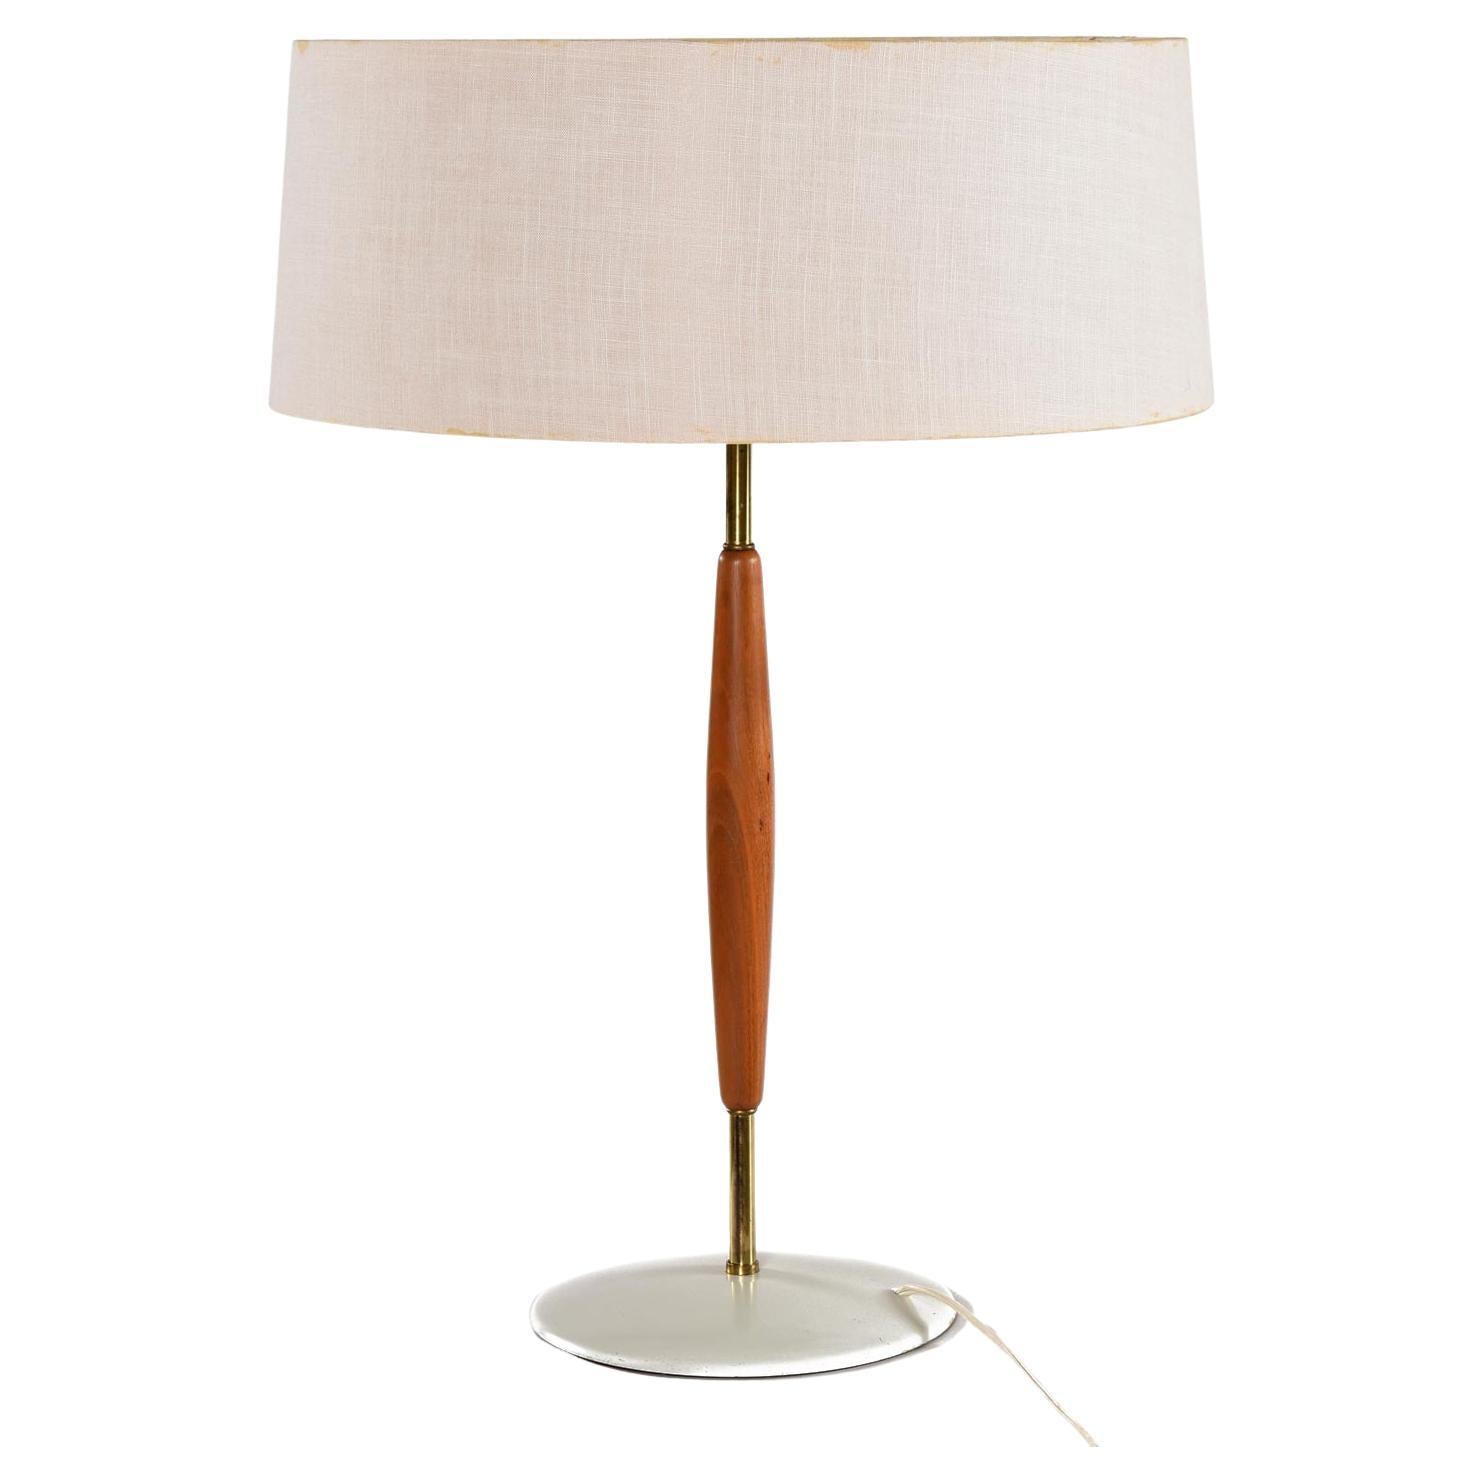 Gerald Thurston for Lightolier Walnut and Brass Tapered Table Lamp